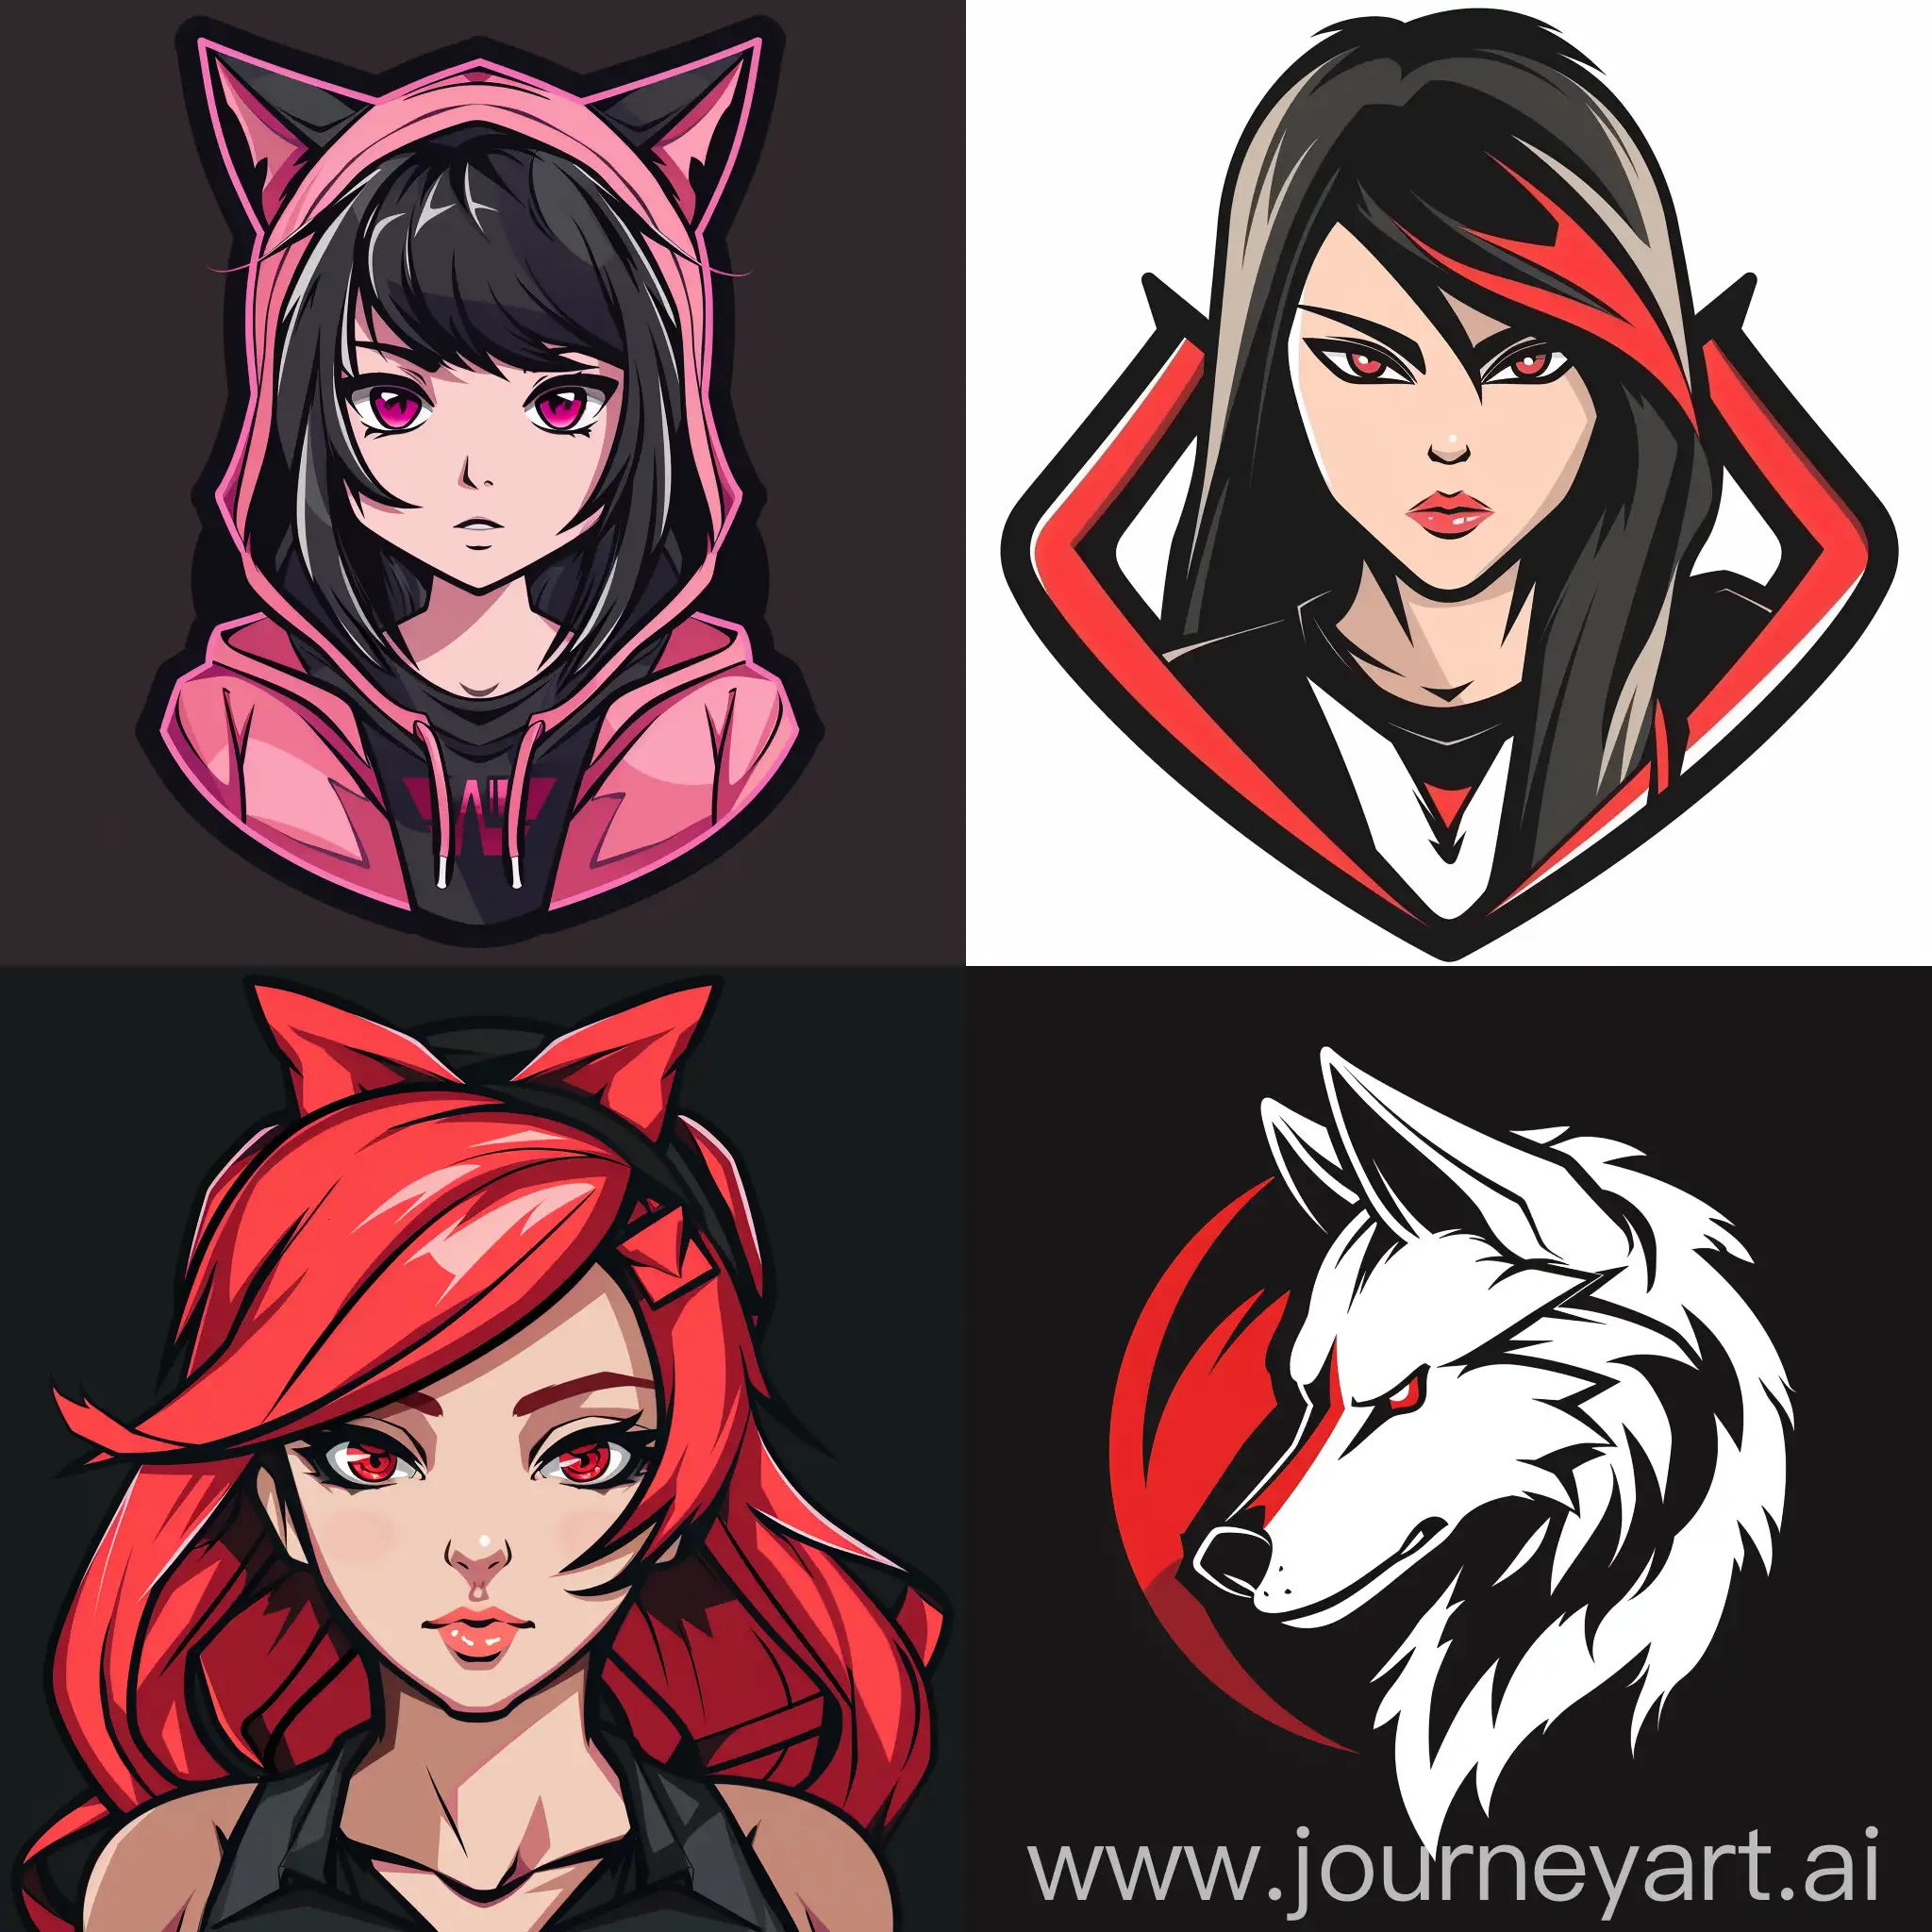 Anime-Style-Team-Logo-Design-with-Vibrant-Colors-and-Dynamic-Characters